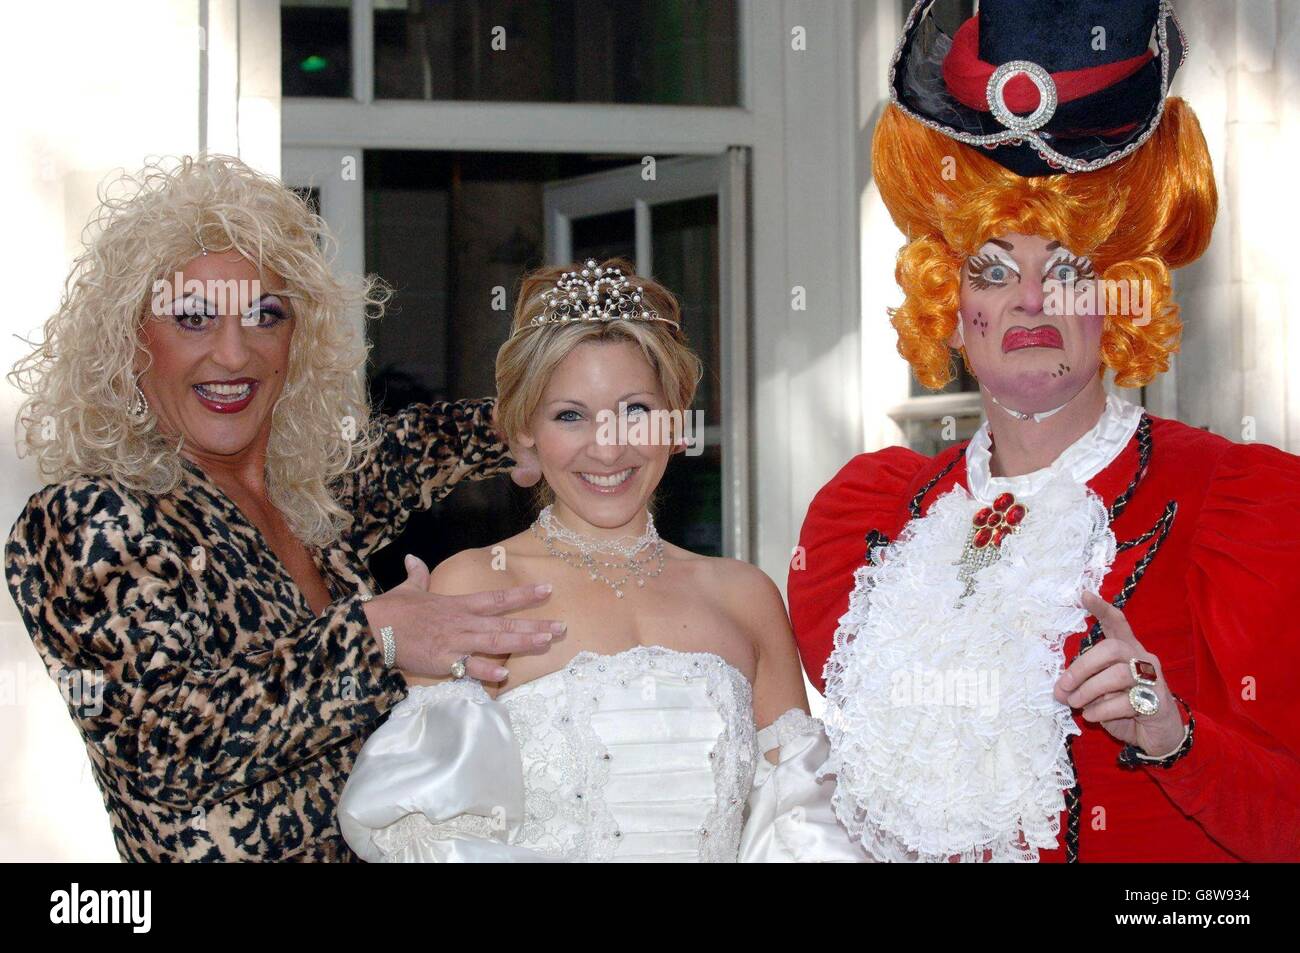 TV presenter Naomi Wilkinson who plays Cinderella, with Dave Lynn (left) and Stevie Marc as her Ugly Sisters, during a photocall to at Forbes House on Halkin Street, central London Thursday 29 Sepotember 2005. to launch the regional panto run of Cinderella at the New Wimbledon Theatre from Friday 9 December 2005 til Sunday 15 January 2006. PRESS ASSOCIATION Photo. Photo Credit should read: Steve Parsons/PA. Stock Photo